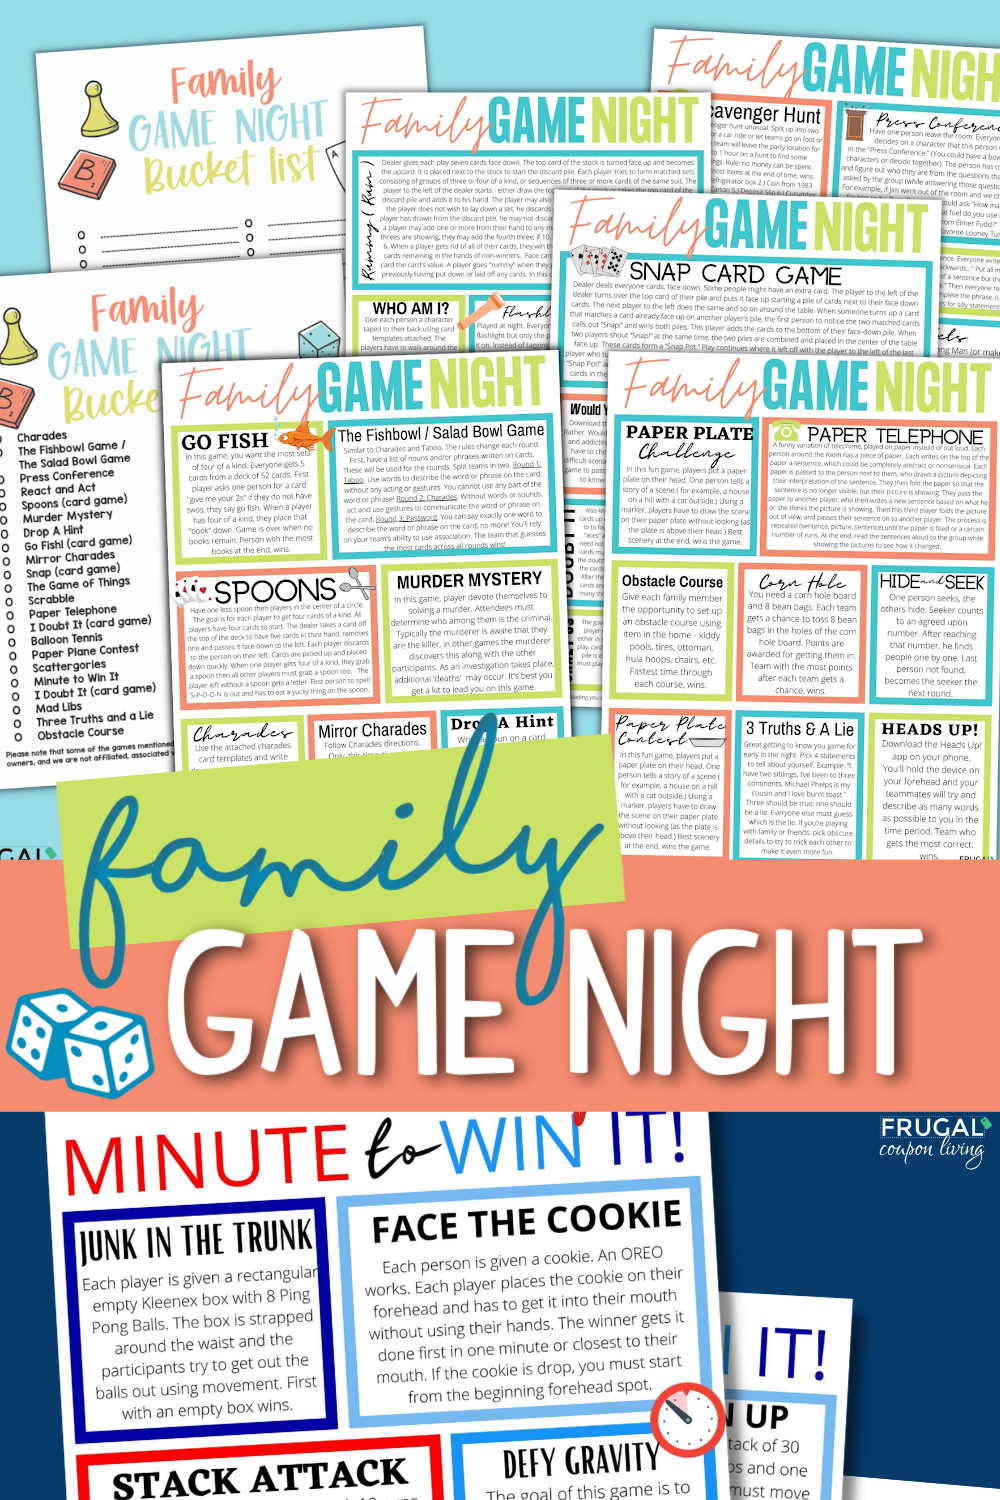 Family Game Night - 46 Game Instructions & Game Bucket List